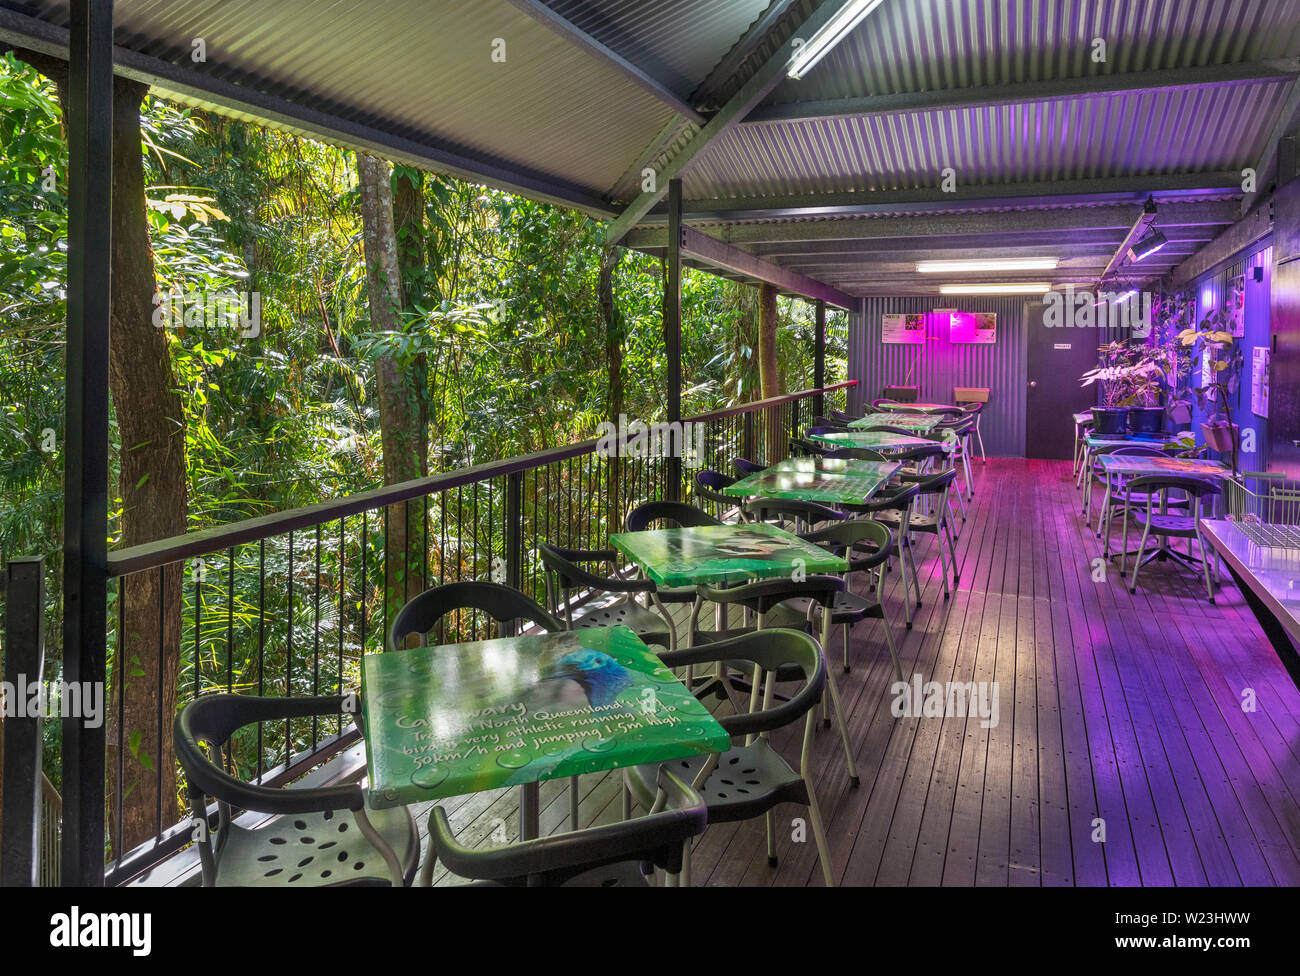 Cafe terrace at the Daintree Discovery Centre, Daintree Rainforest, Daintree National Park, Queensland, Australia Stock Photo